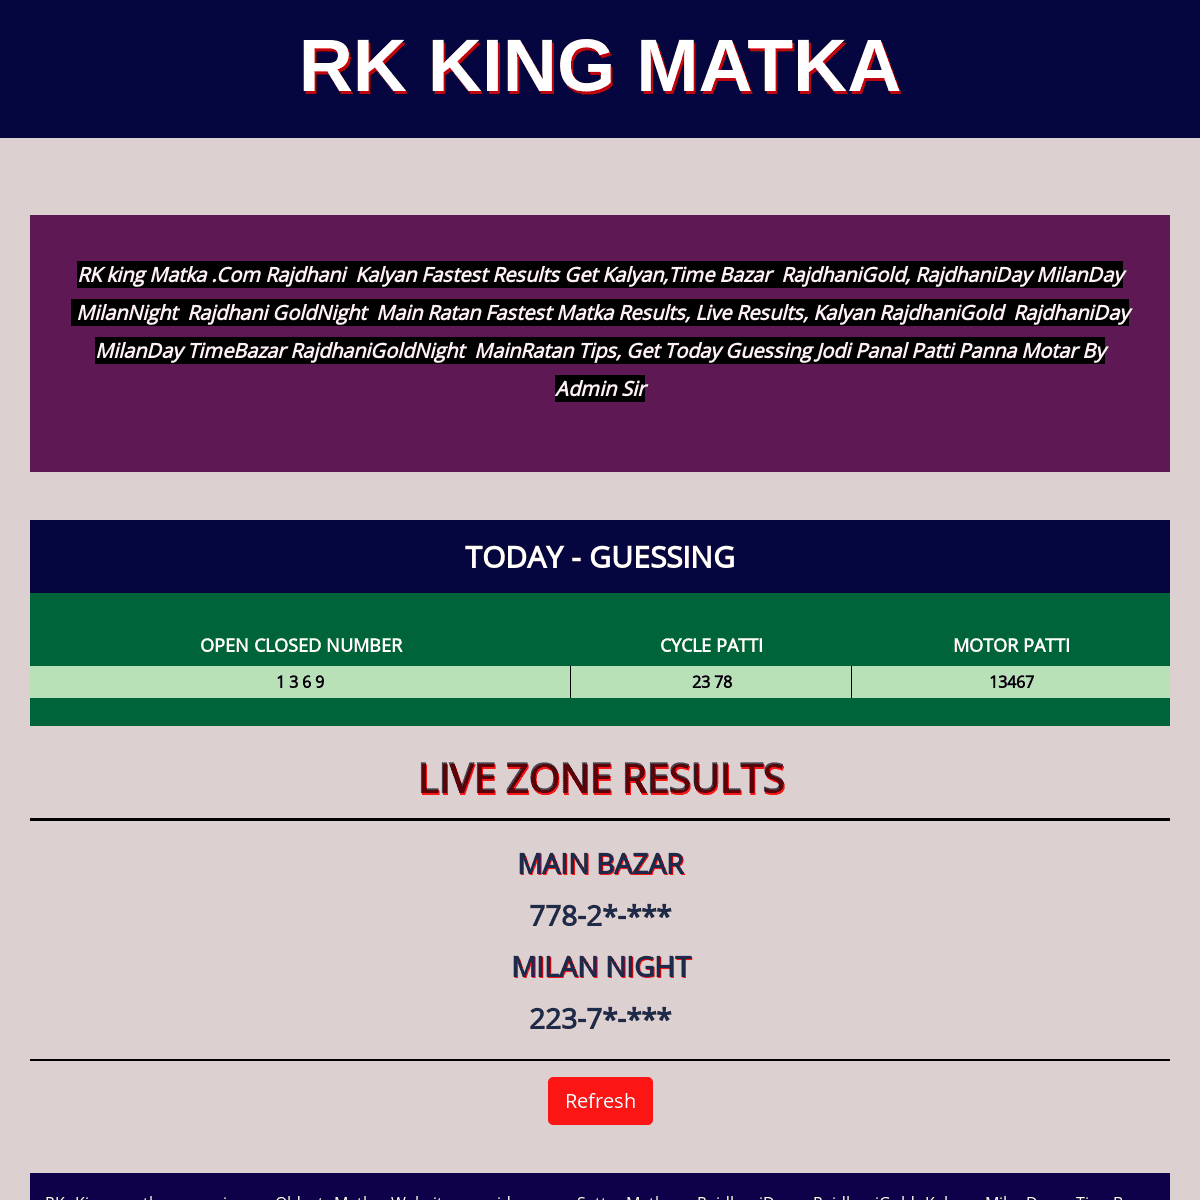 A complete backup of http://rkkingmatka.com/